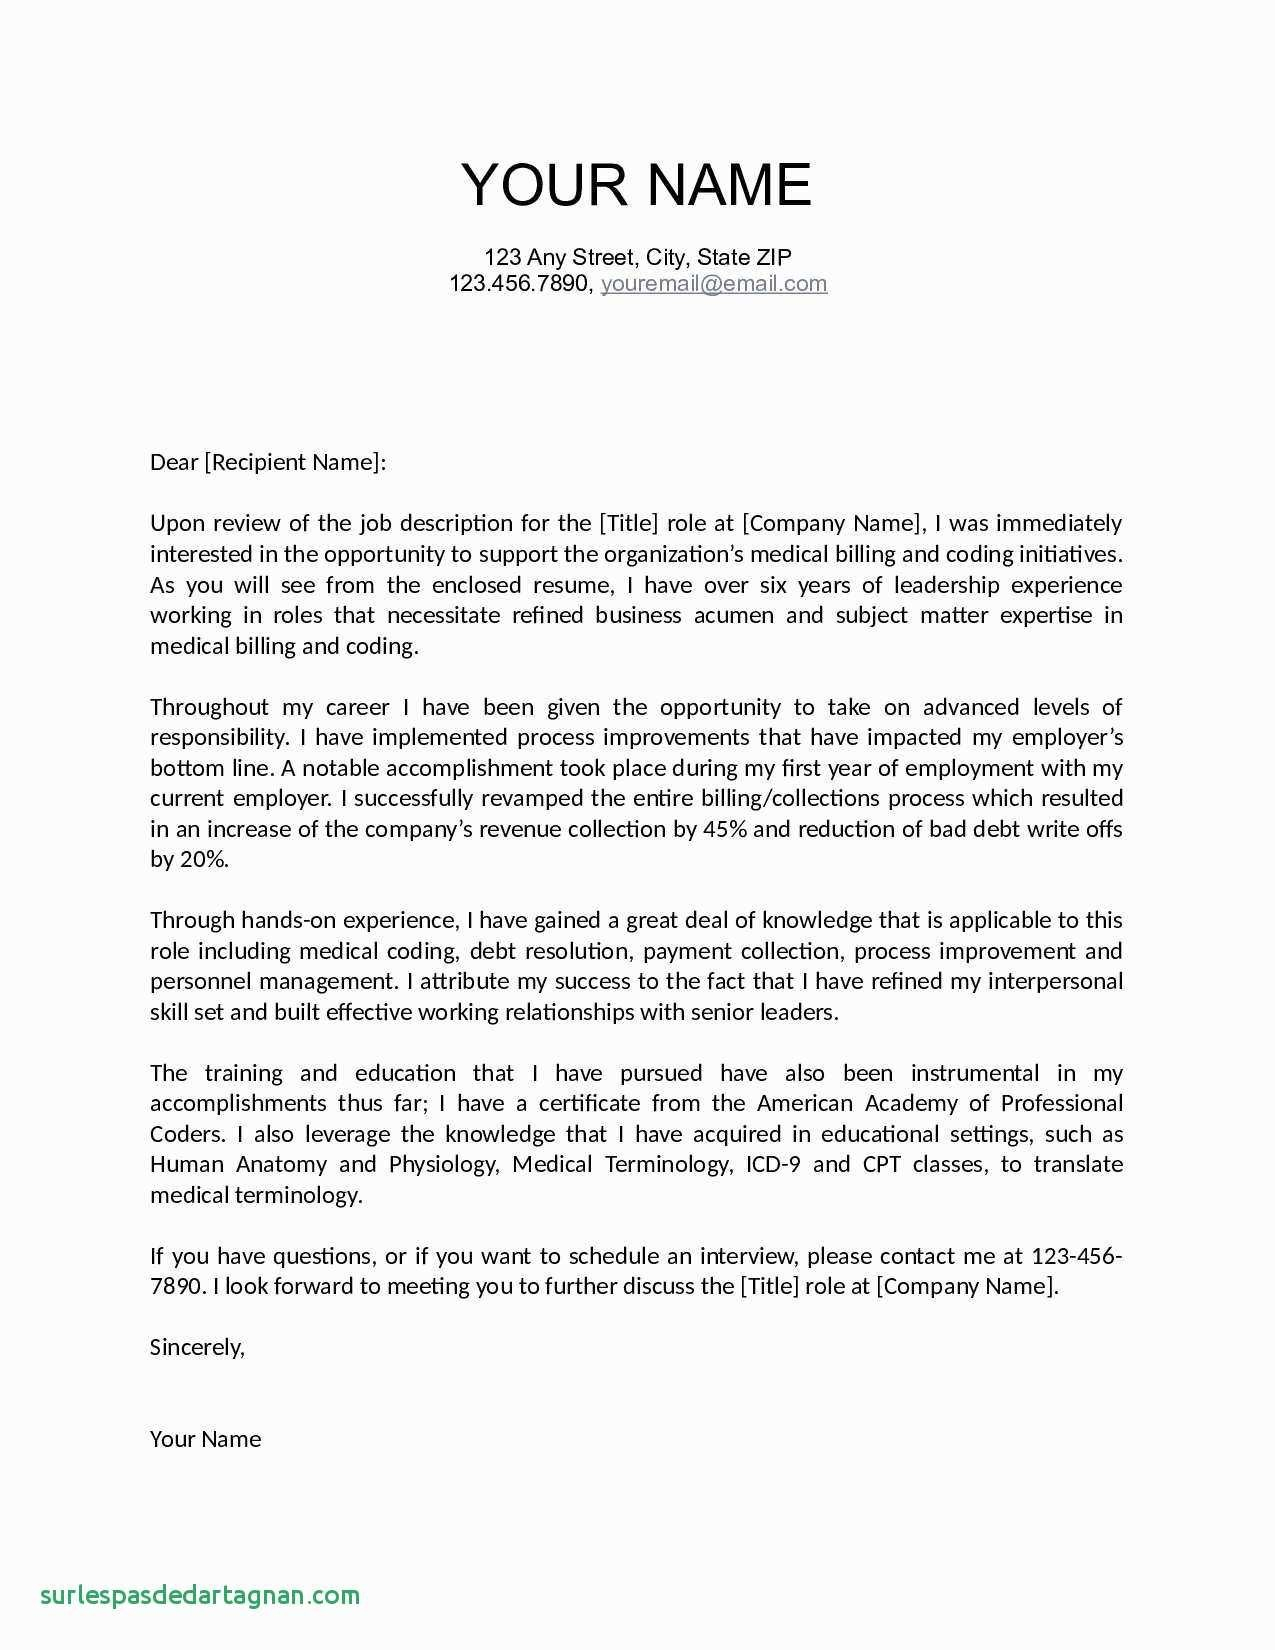 How to Create A Cover Letter Template - How to Make Resume for Job Beautiful Fresh Job Fer Letter Template